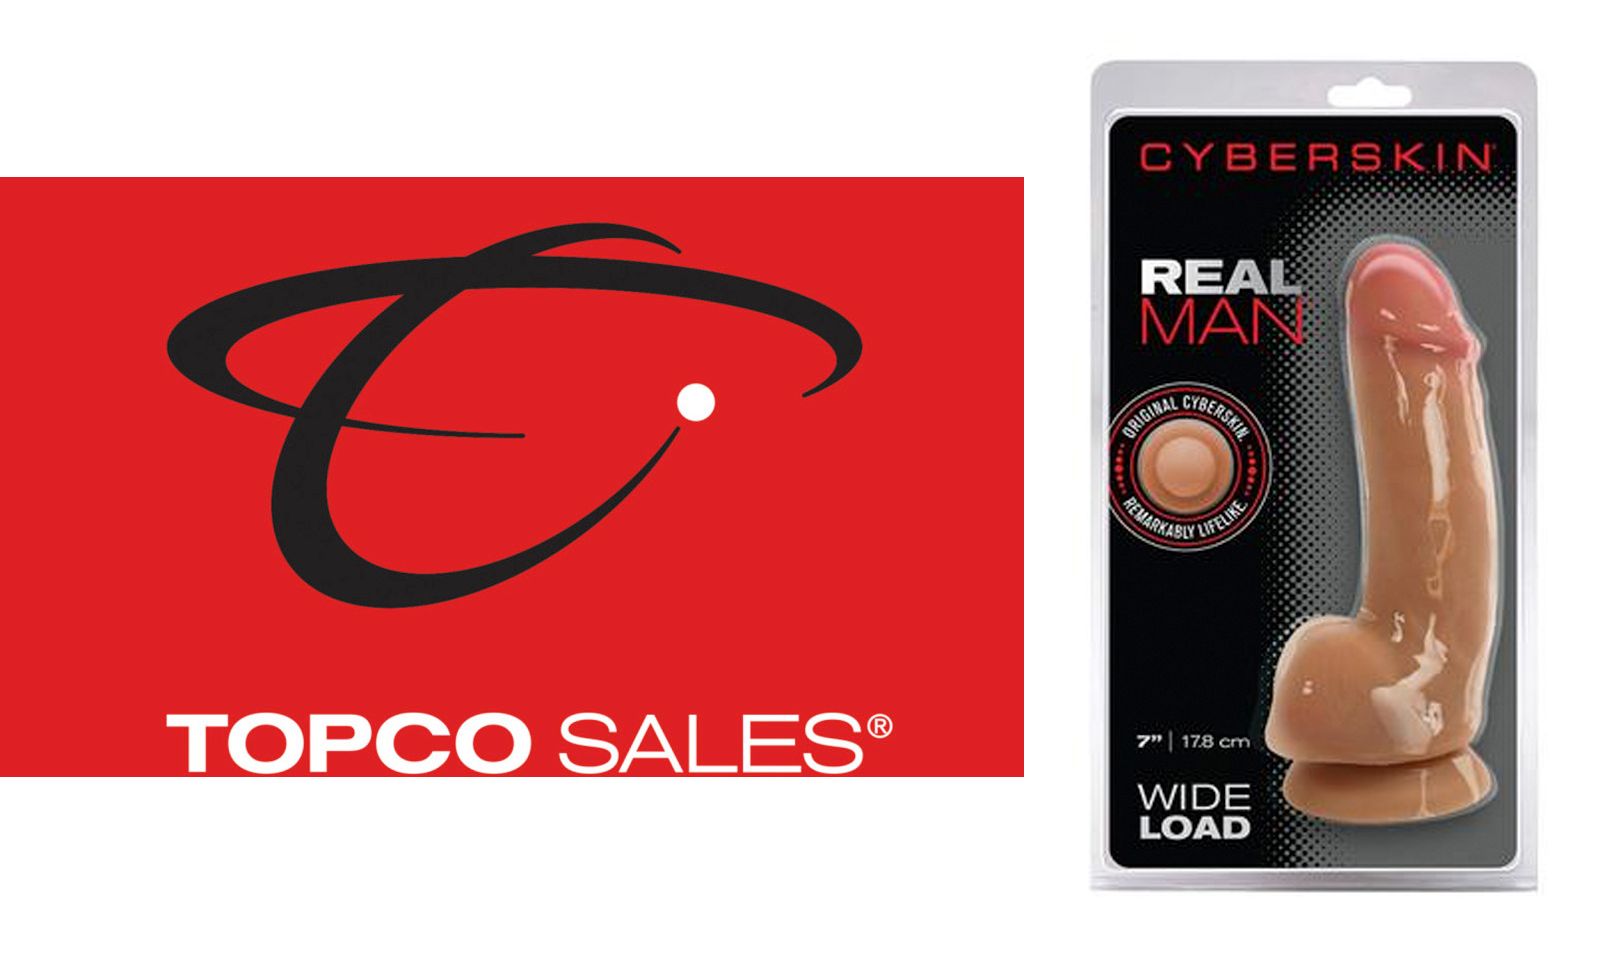 Real Man Dual-Density CyberSkin Dildos Shipping From Topco Sales